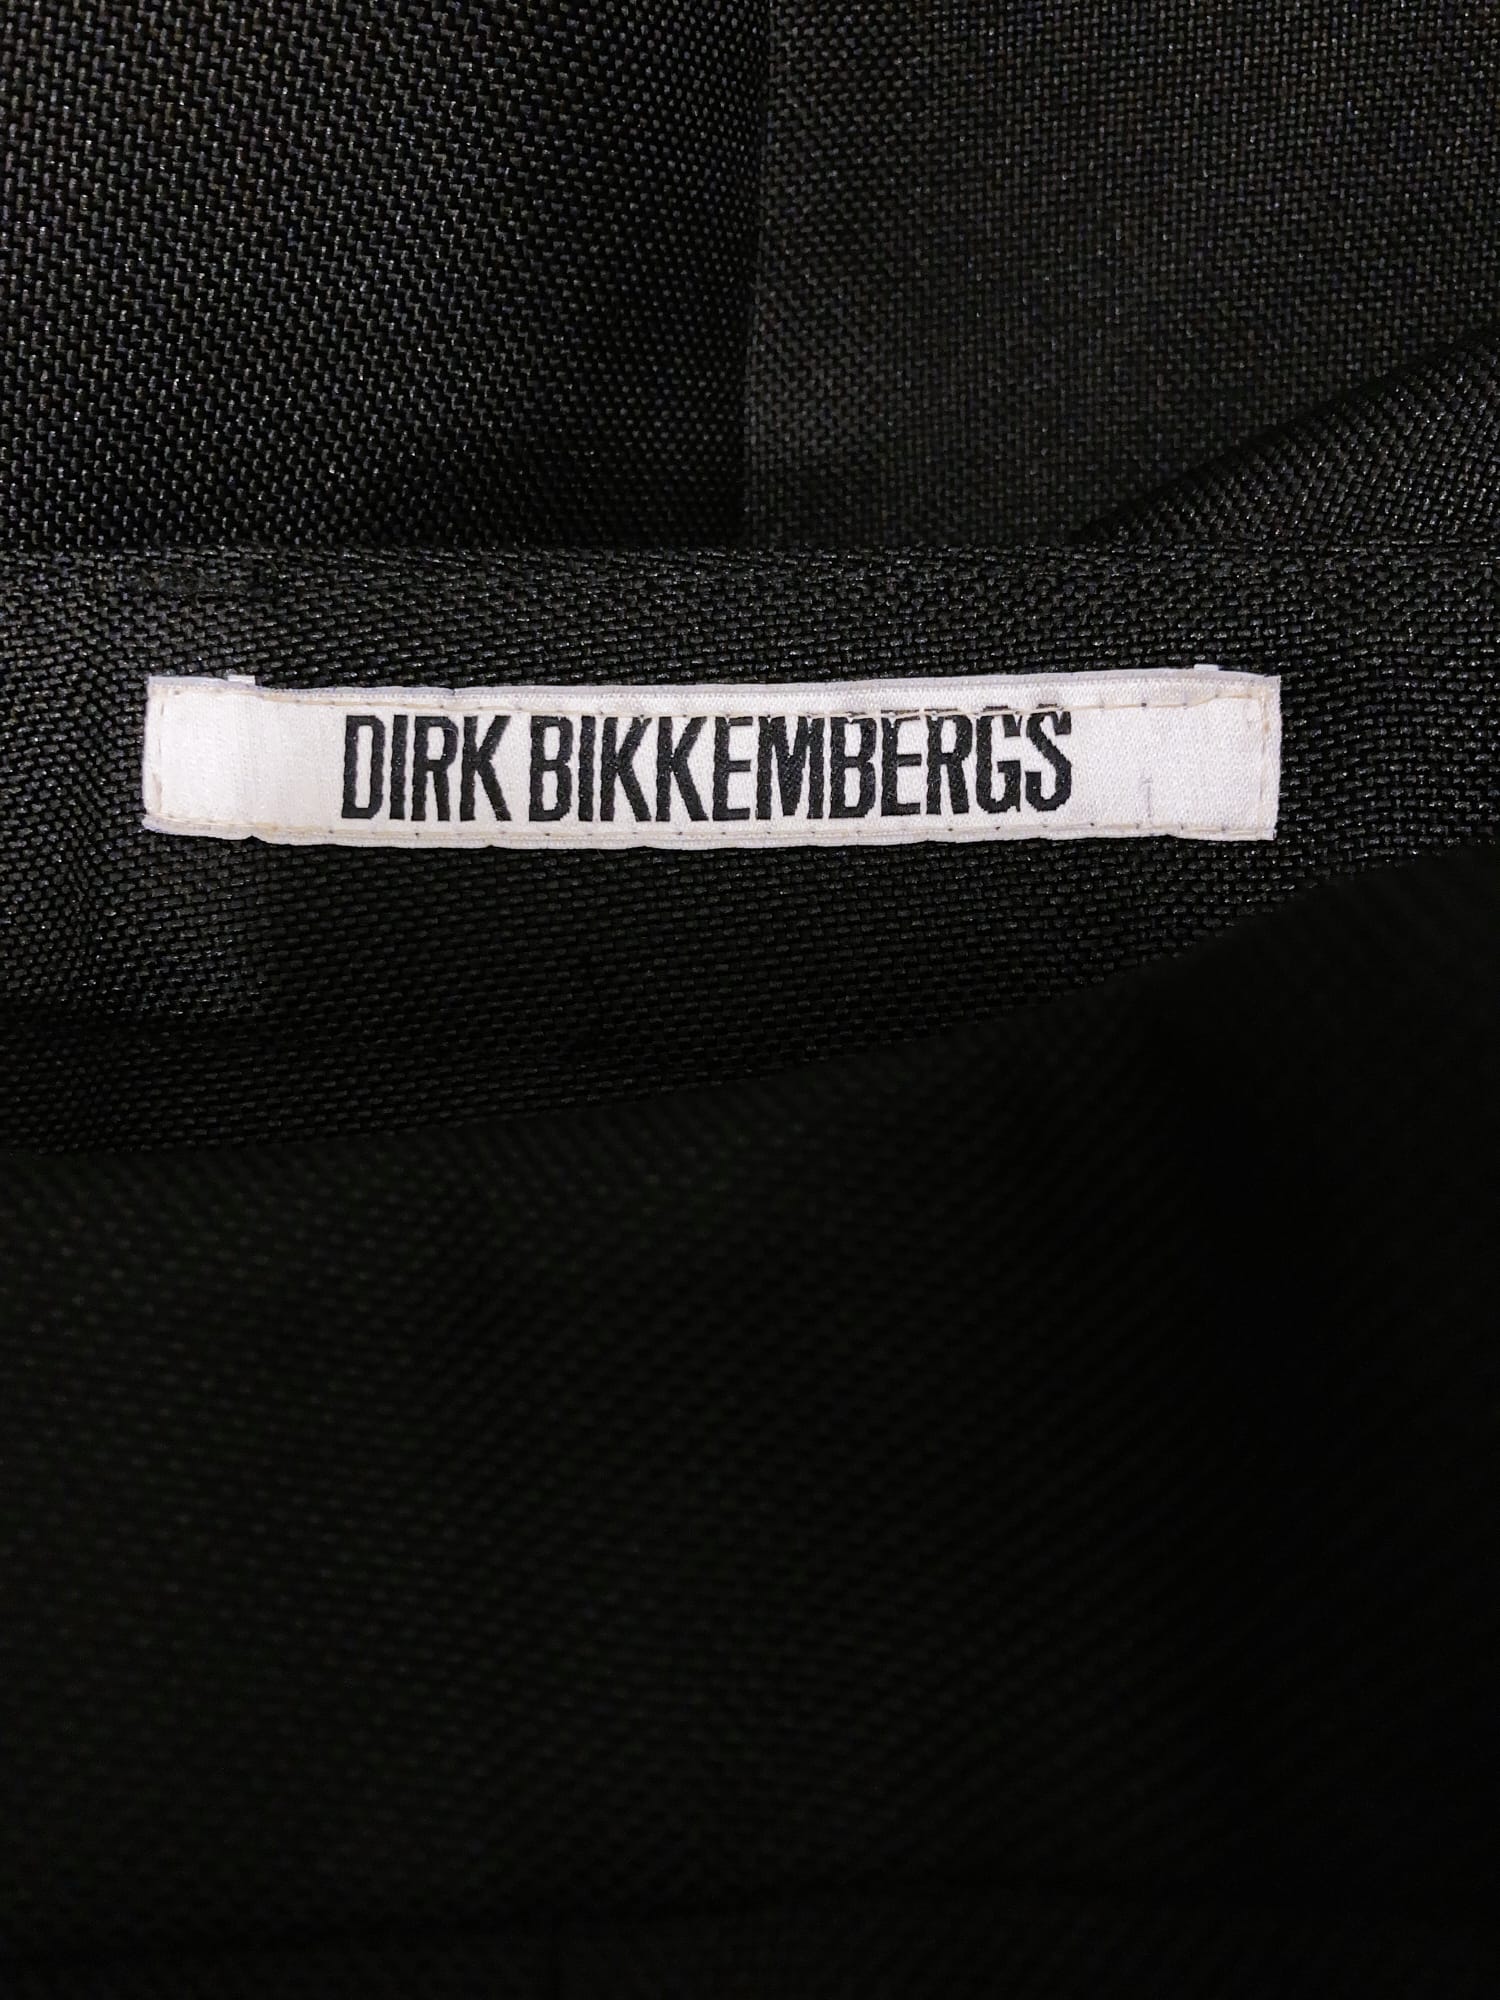 Dirk Bikkembergs 1990s 2000s black polyester canvas pleated trousers - size 46